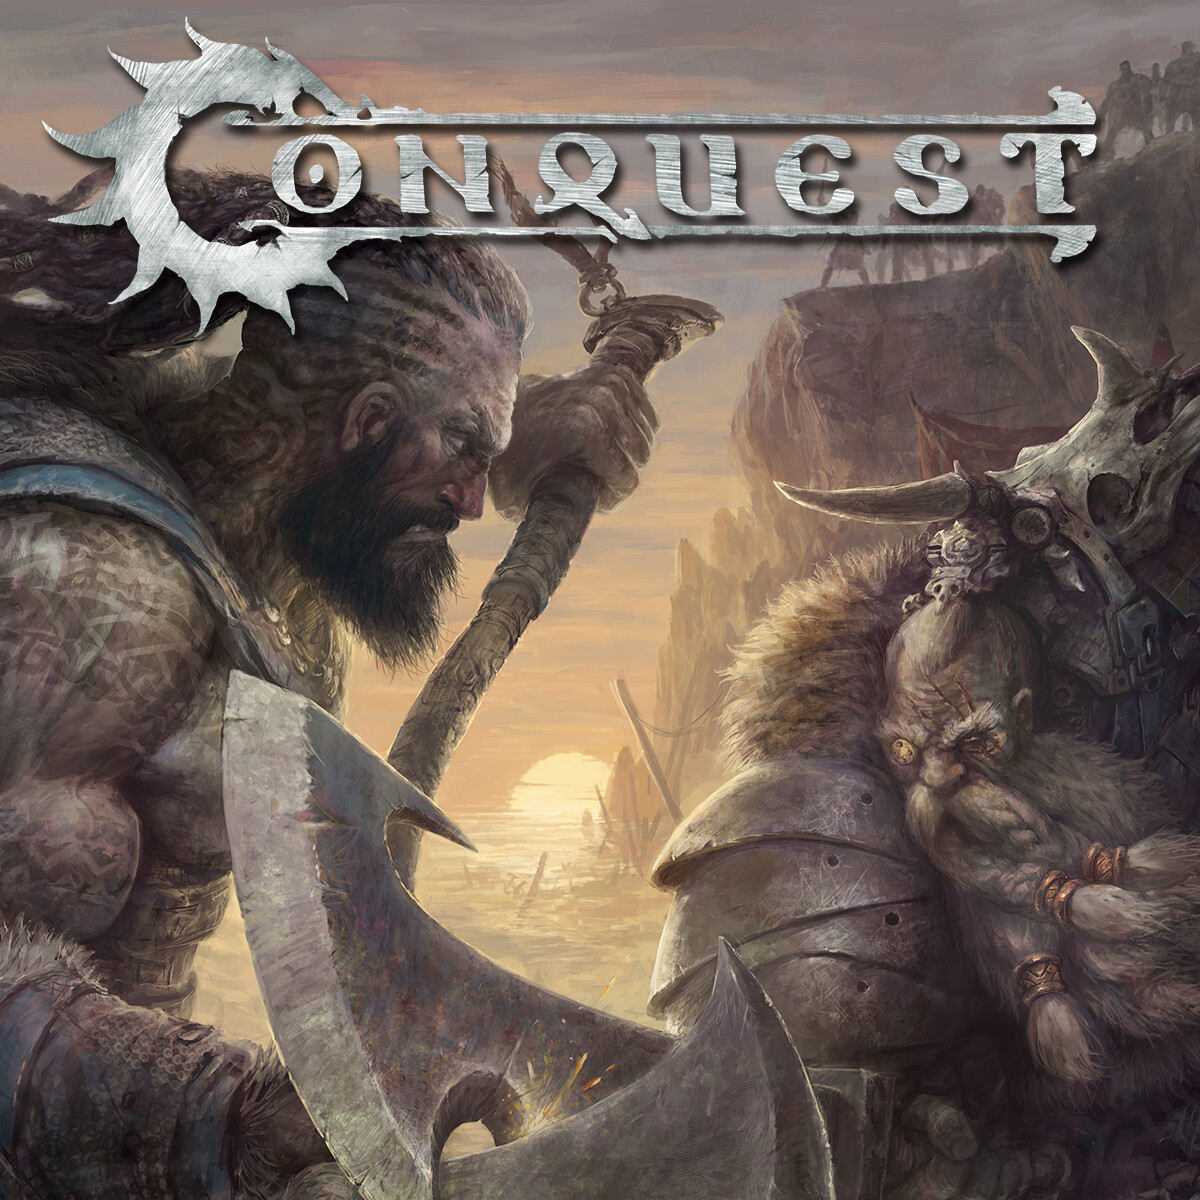 Conquest - Nords illustrations